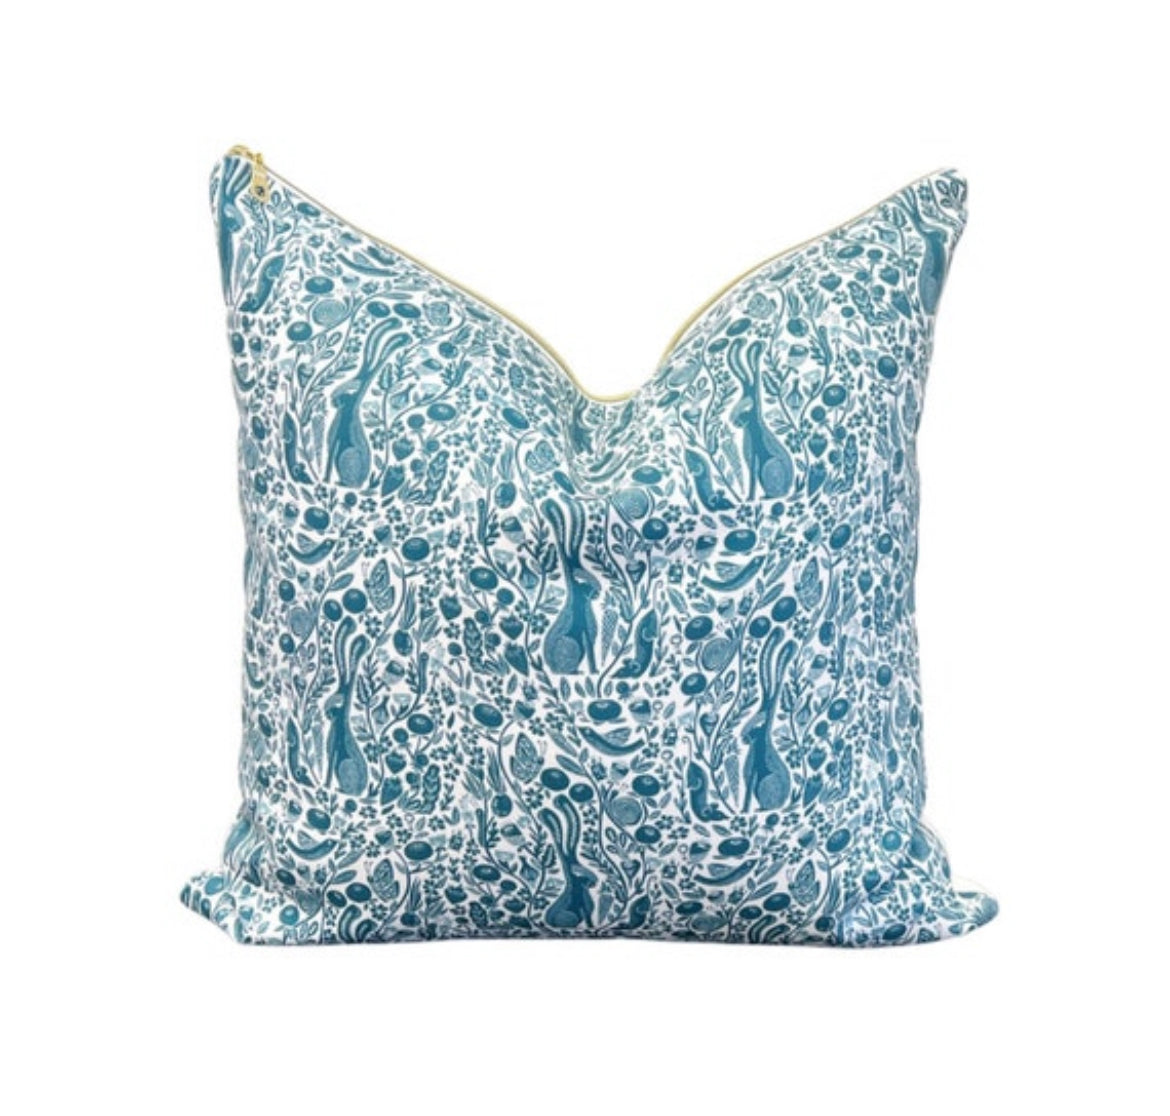 Hare Woodland Forest Pillow Cover - Teal